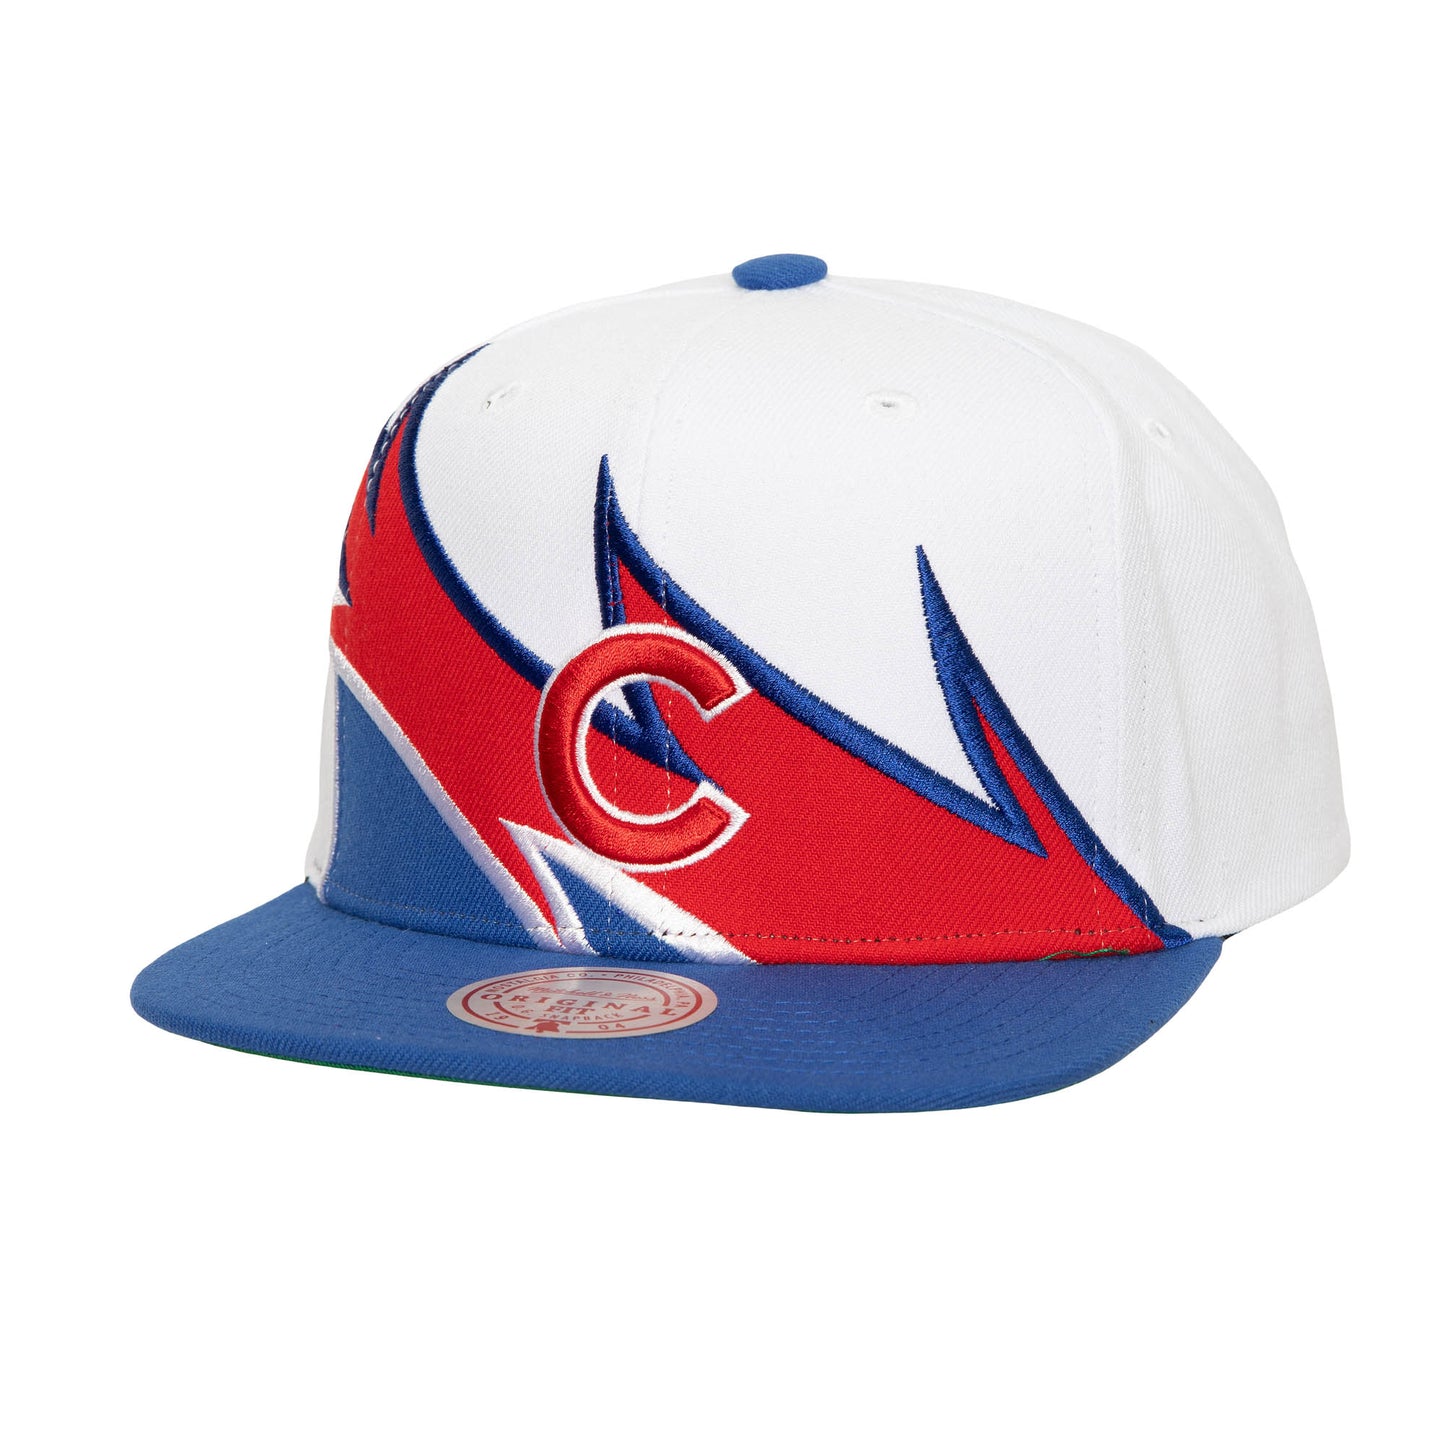 Chicago Cubs Mitchell & Ness Wave Runner Snapback Hat